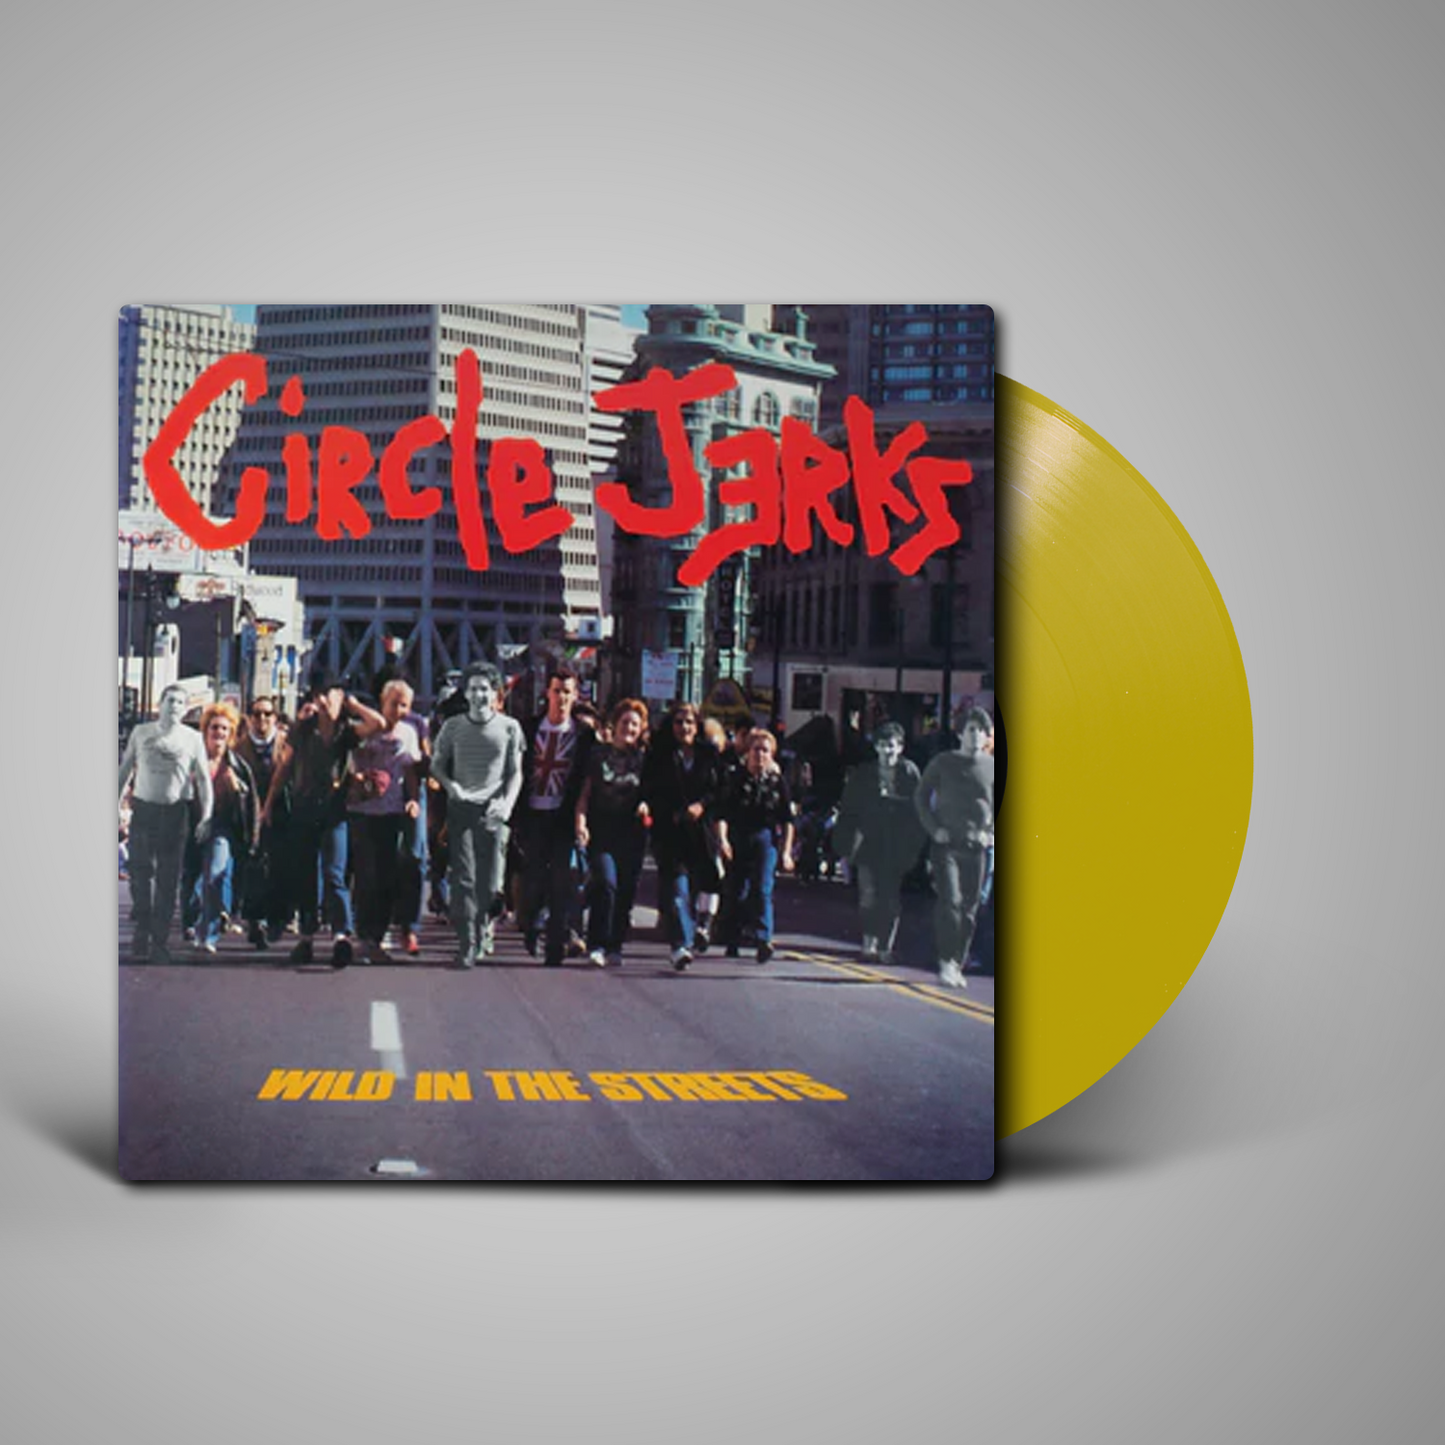 Circle Jerks - Wild in the Streets: 40th Anniversary Edition